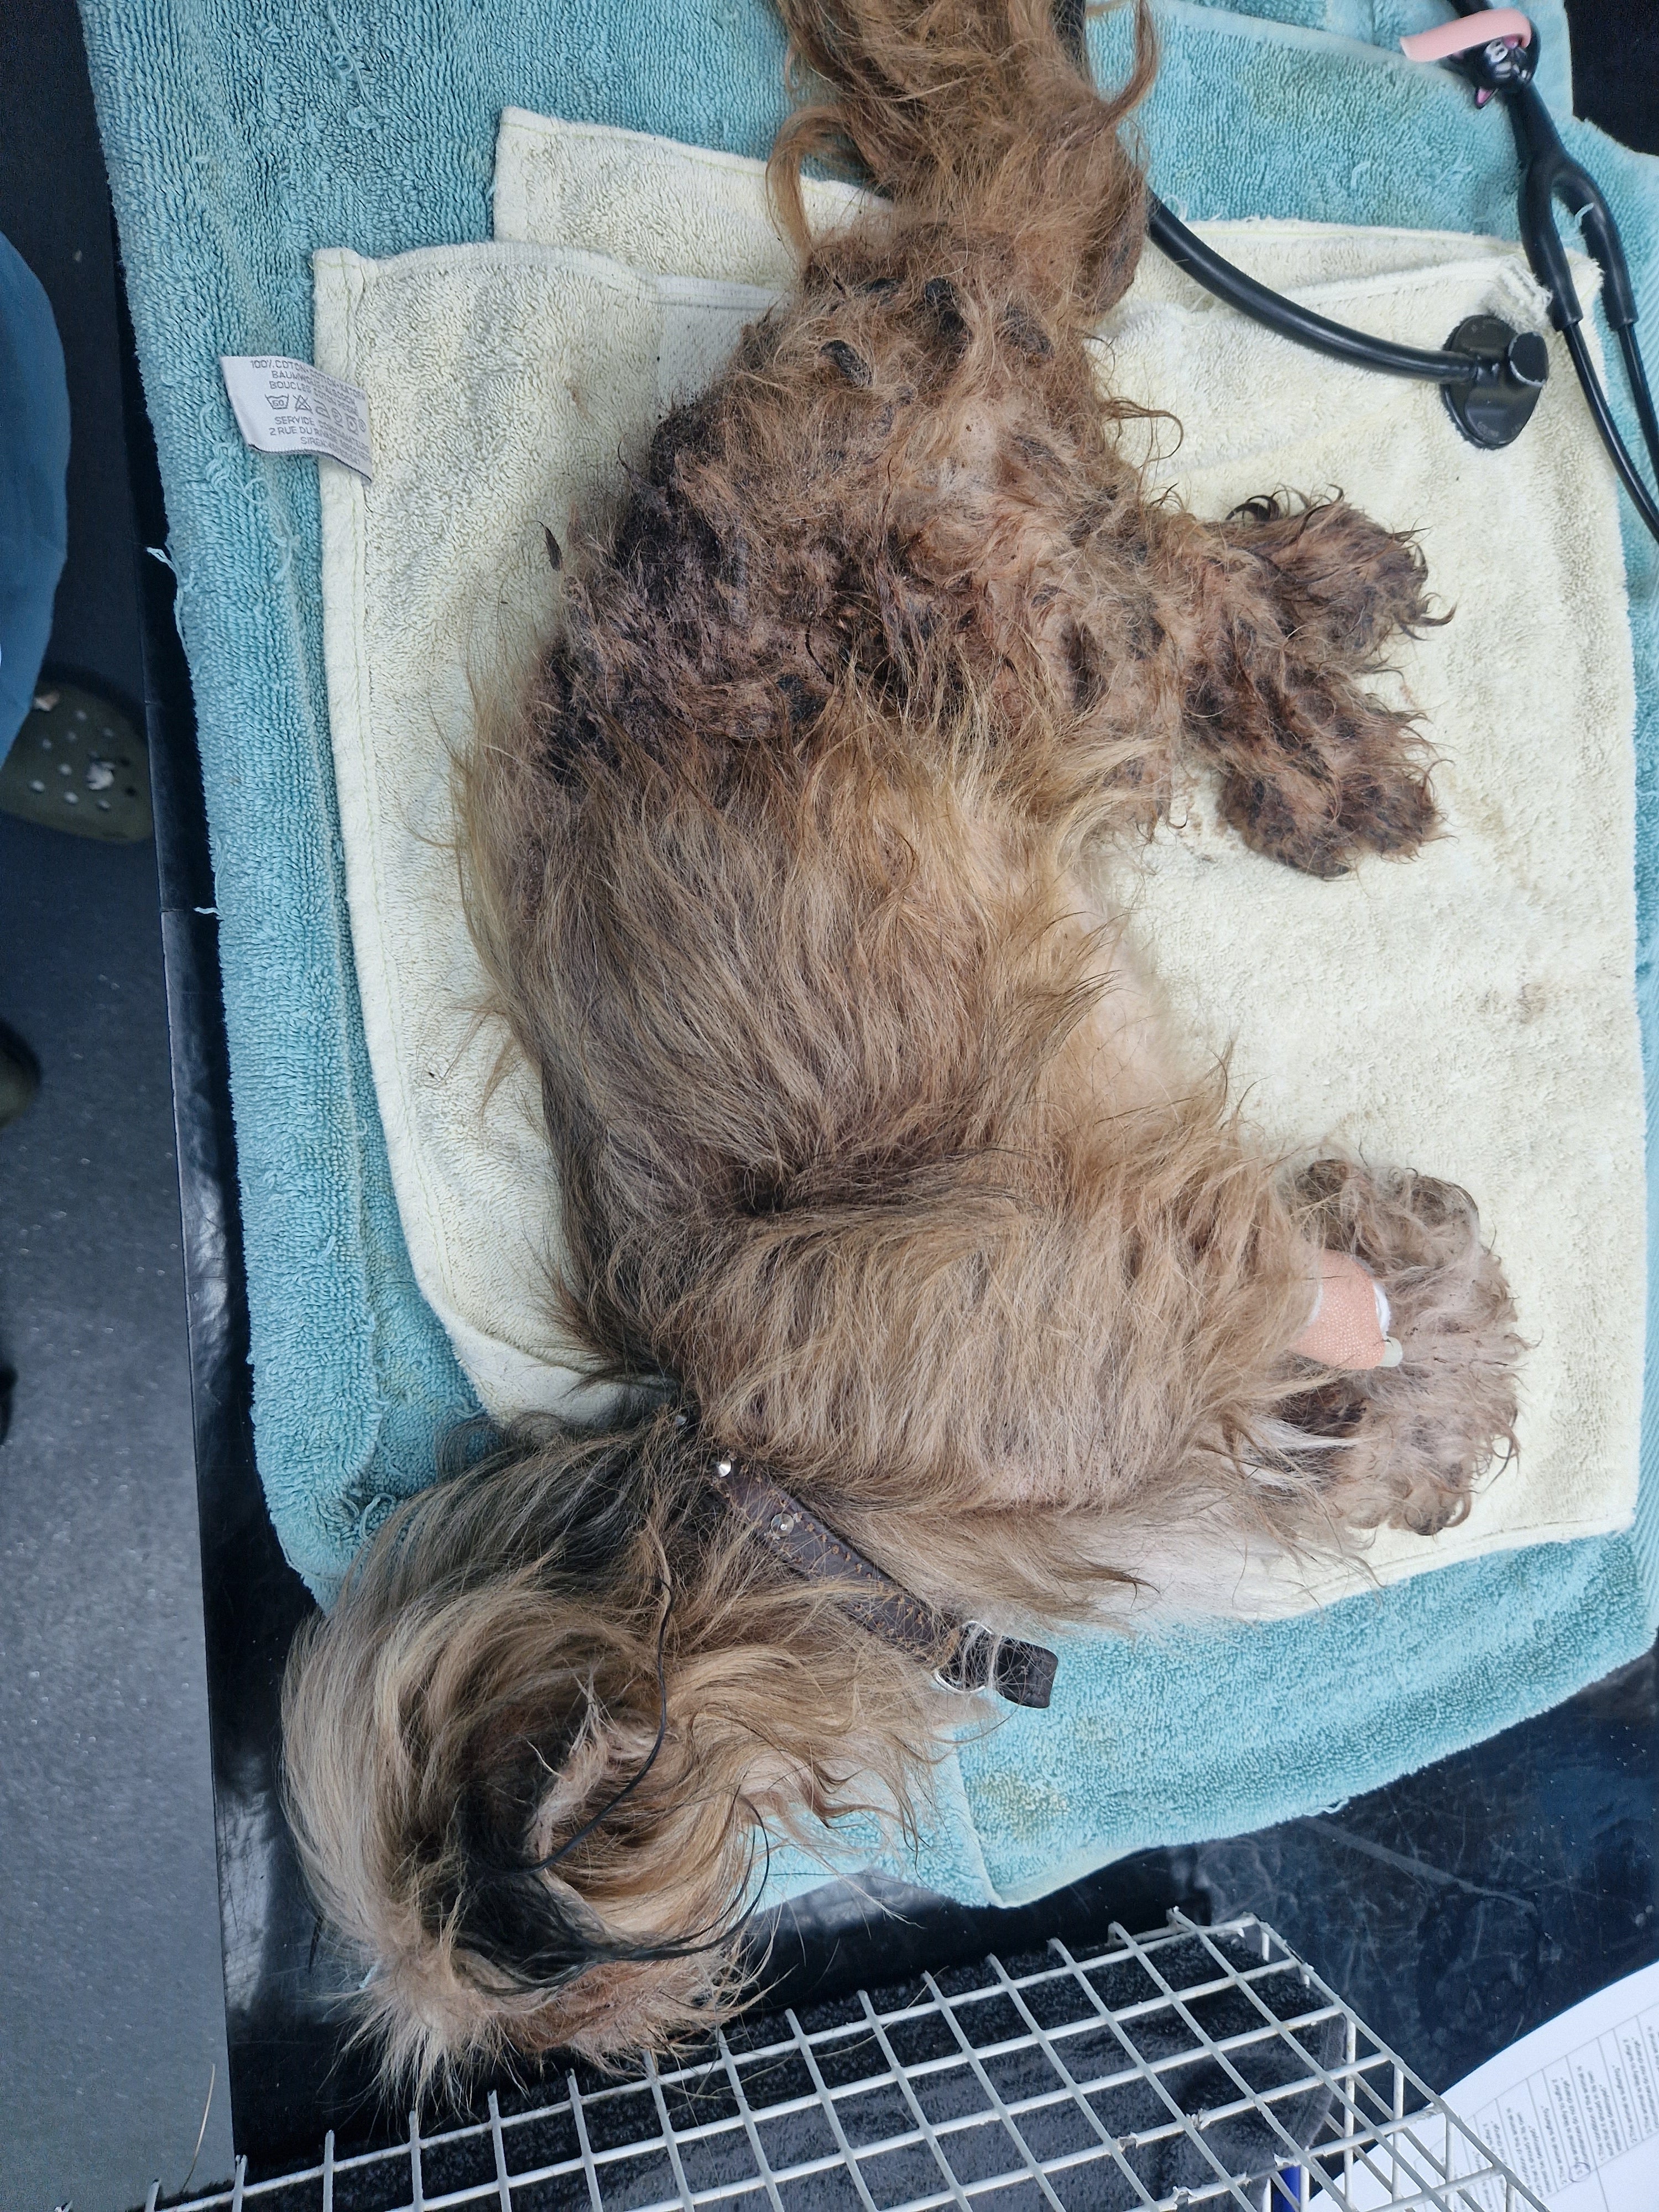 Chewie, a Shih Tzu, developed a heavy flea burden after being neglected for several months